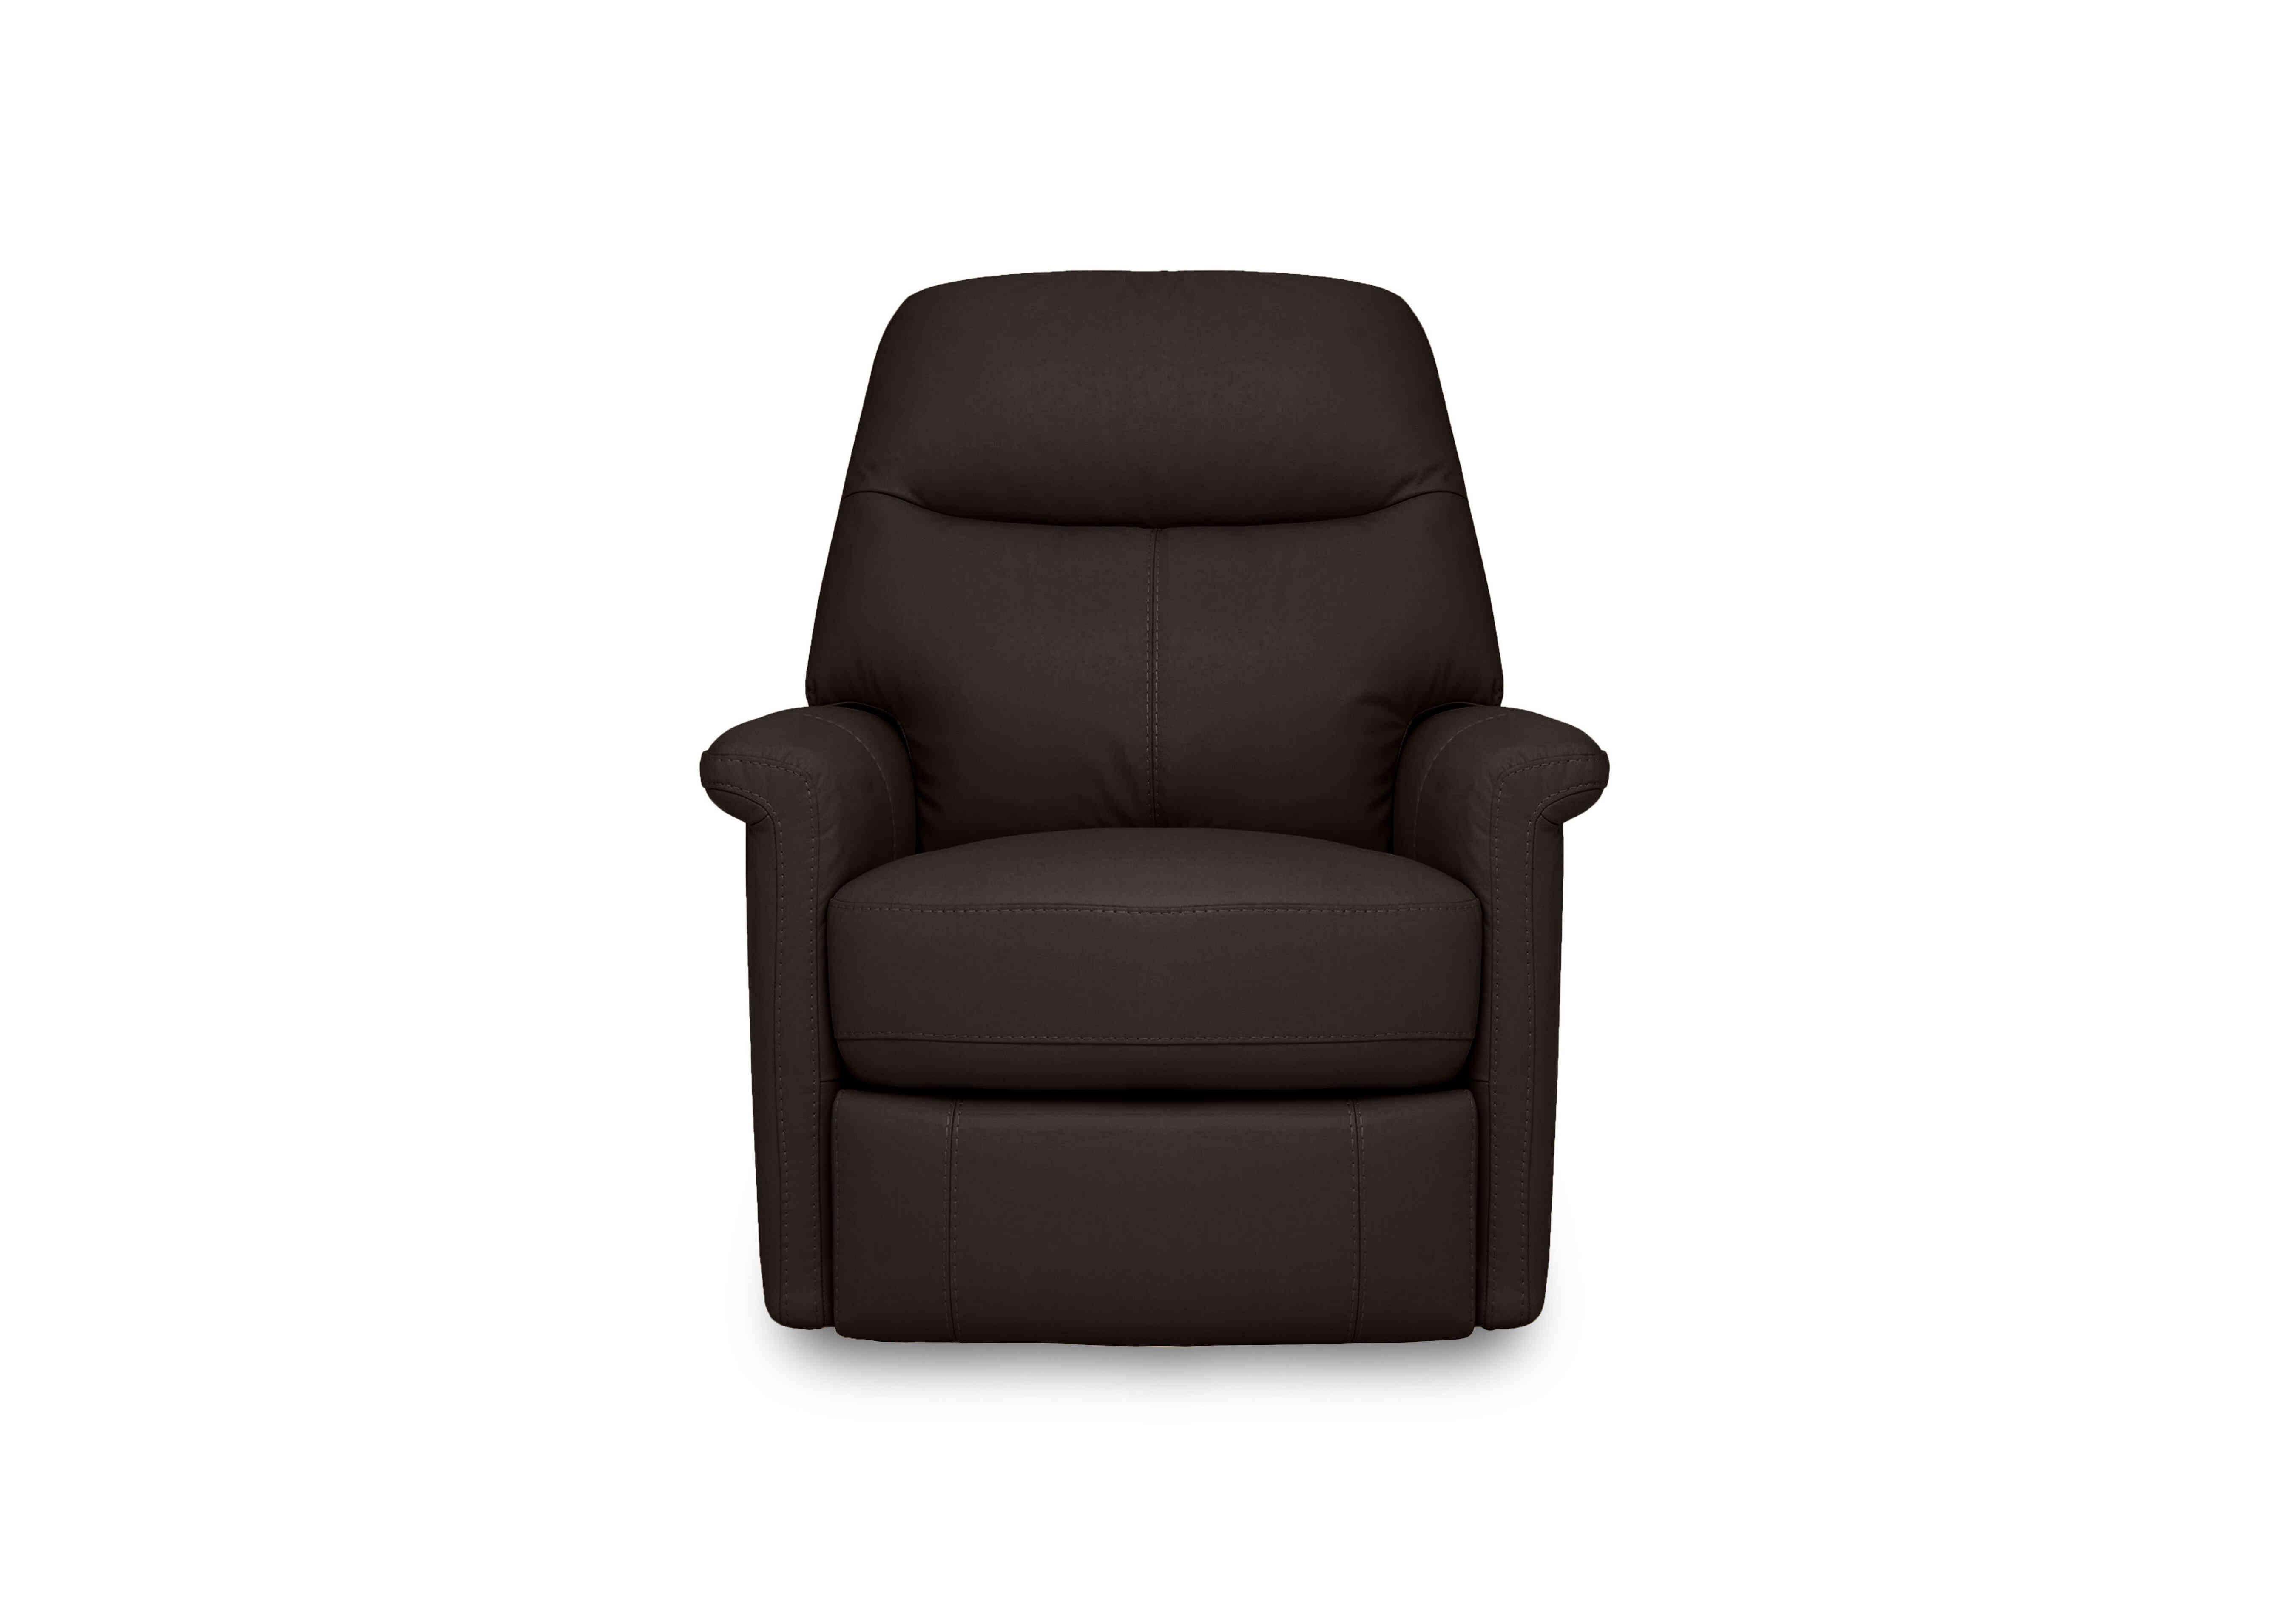 Compact Collection Lille Leather Rocker Swivel Chair with Power Recliner in Bv-1748 Dark Chocolate on Furniture Village